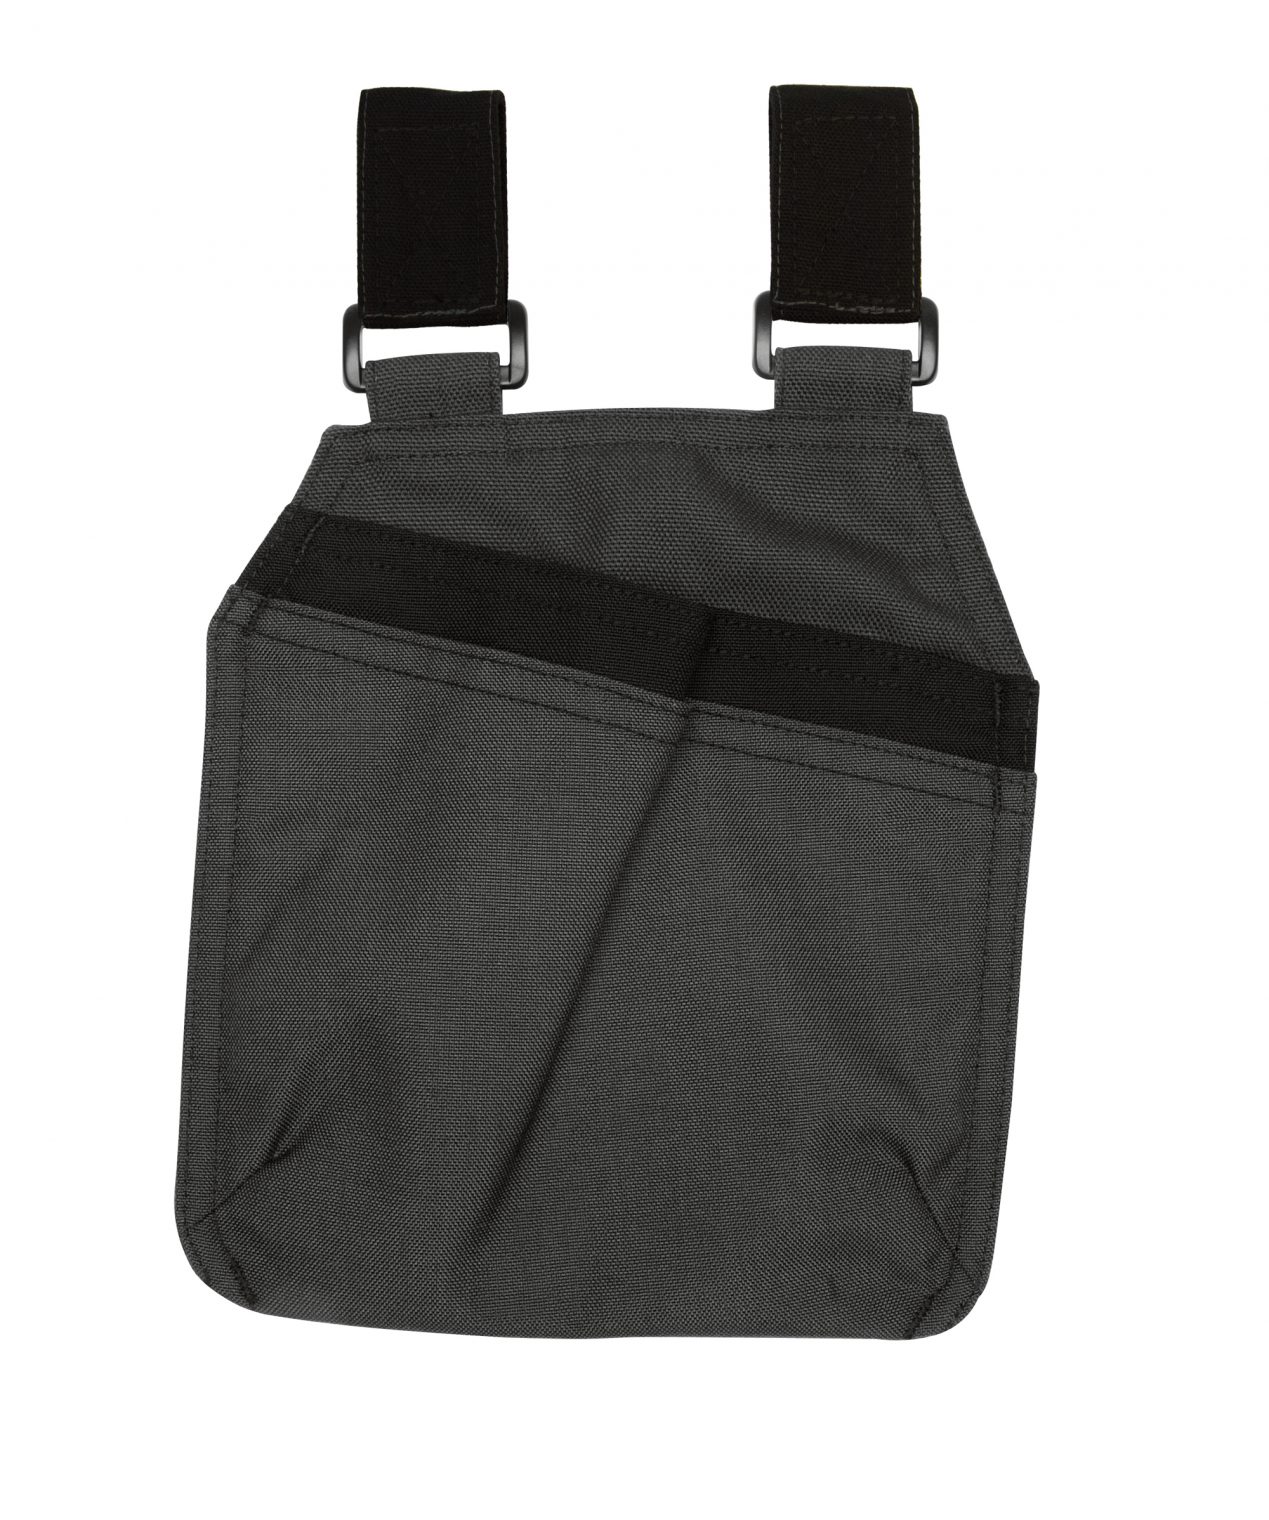 gordon with loops canvas tool pouches per pair with velcro loops anthracite grey black back